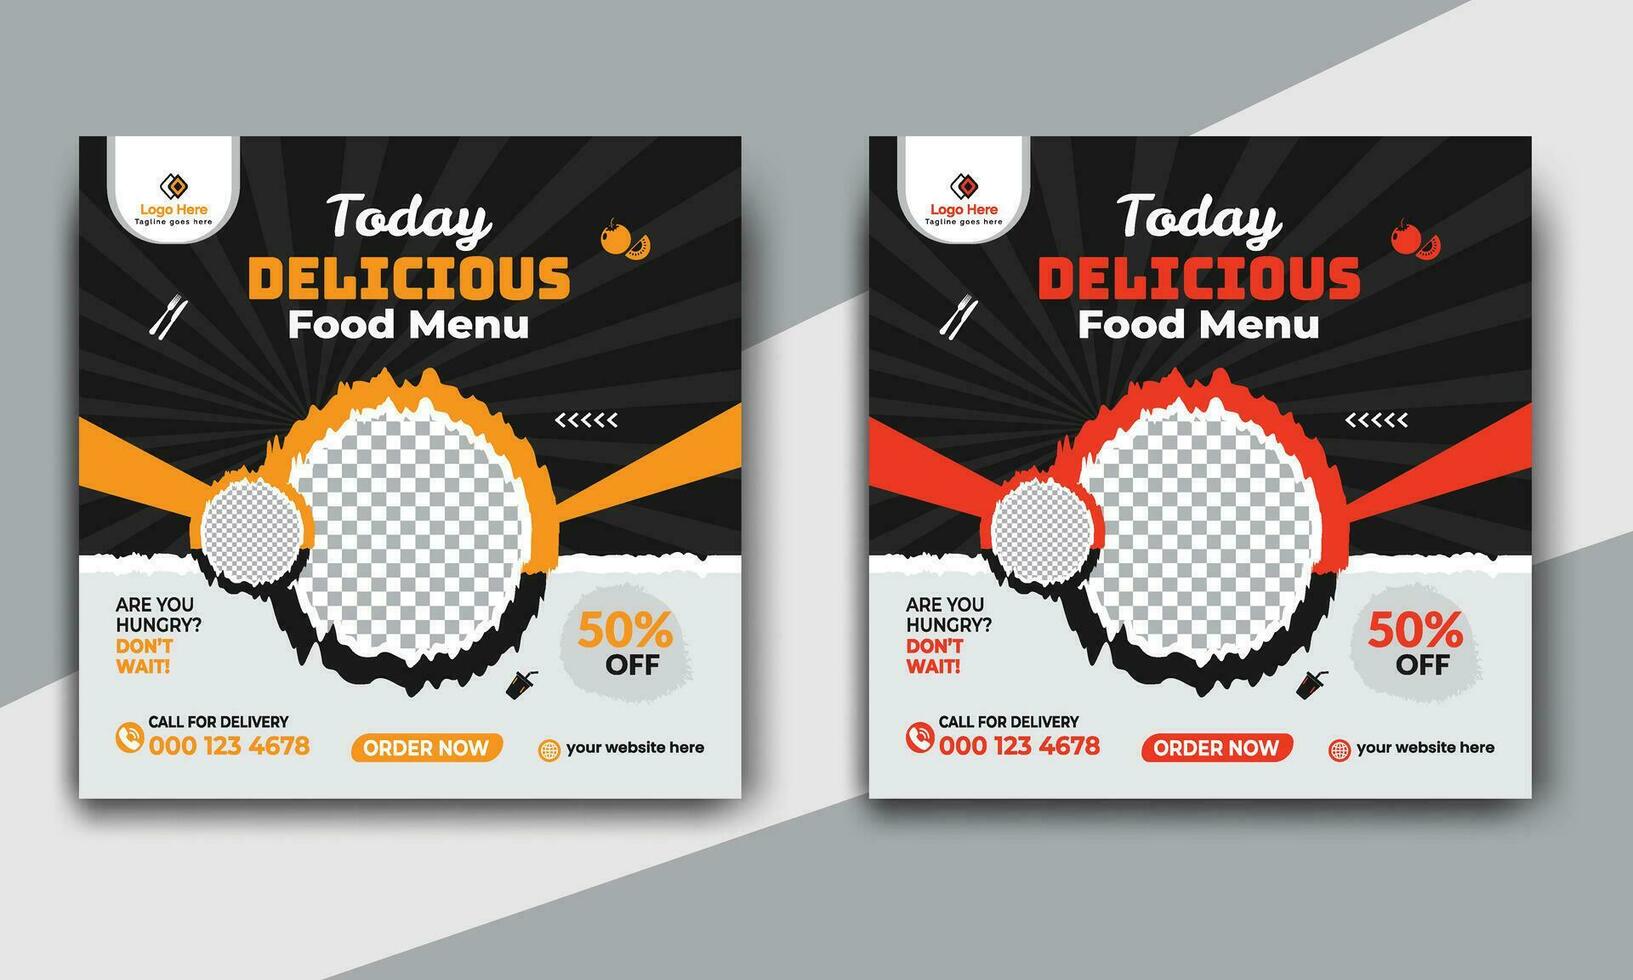 Fast food restaurant business marketing social media post or web banner template design with abstract background. Fresh pizza, burger and online sale promotion flyer vector